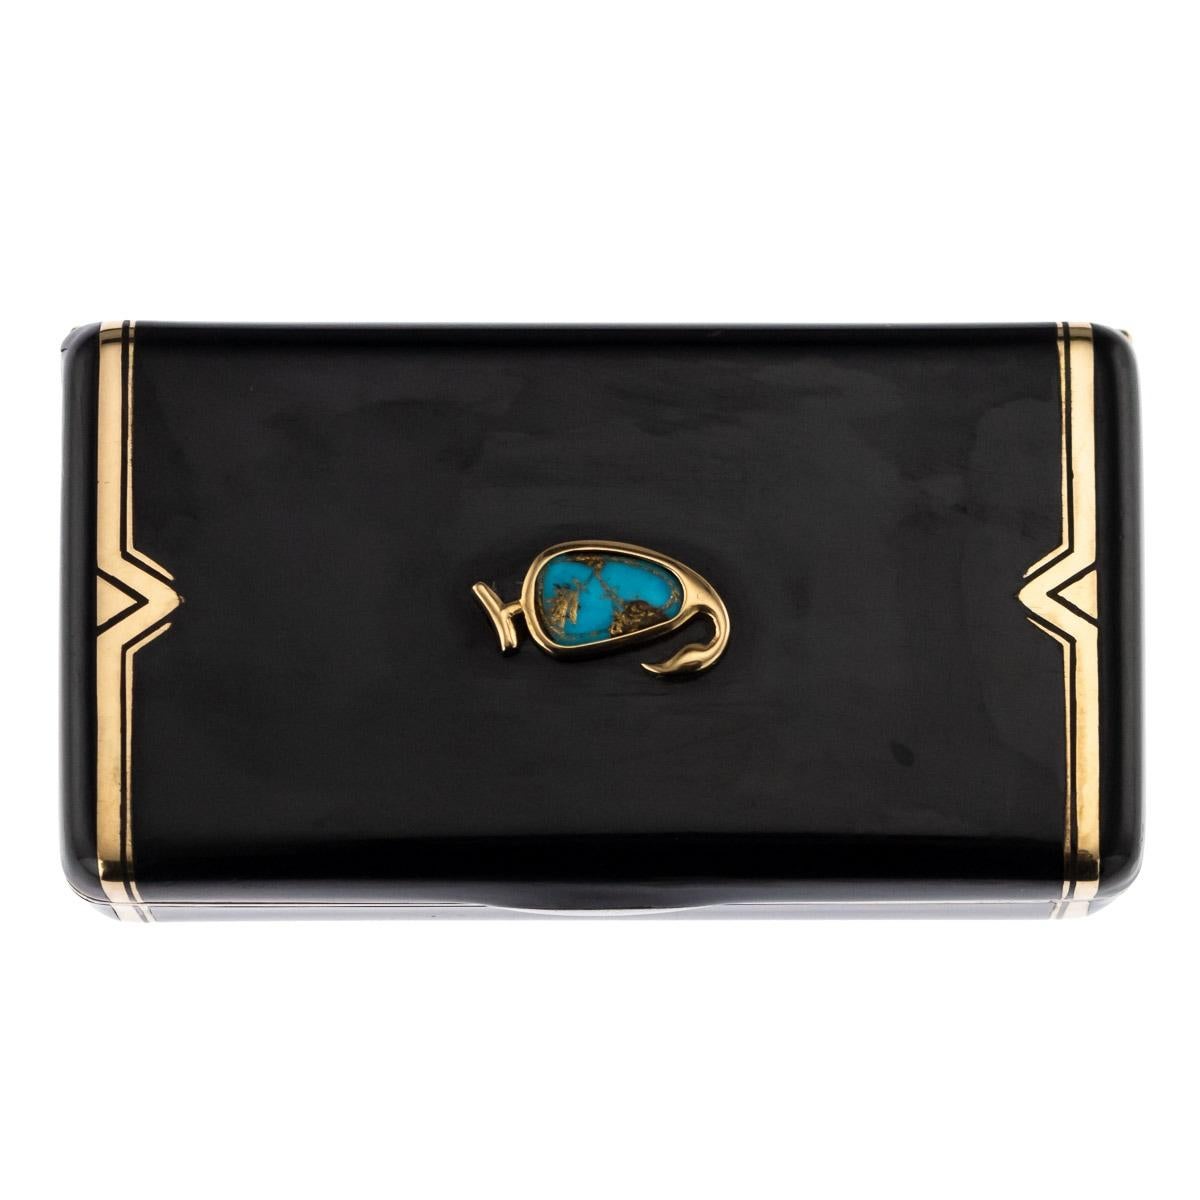 Antique early-20th century French Cartier Art Deco 18-karat gold vanity case, of rectangular form with rounded corners, the lid set with a carved fruit shaped turquoise stone in gold setting, the whole box is applied with black lacquer and Art Deco